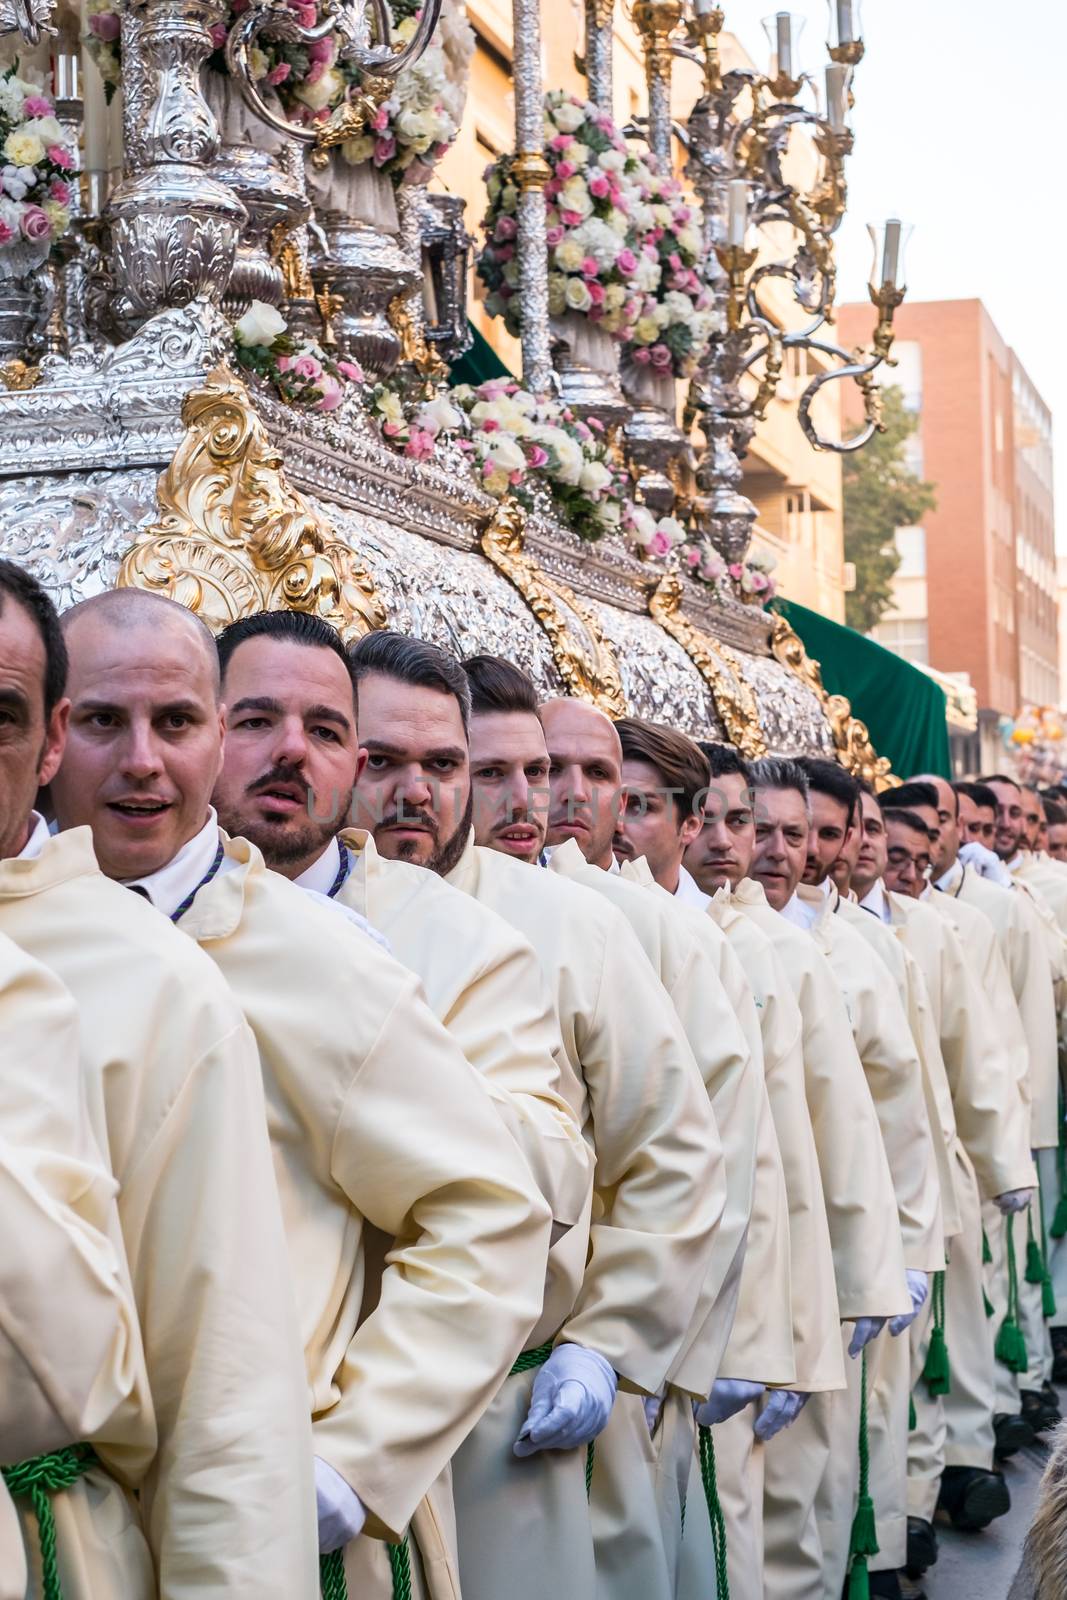 Malaga, Spain - March 27, 2018. People participating in the procession in the Holy Week in a Spanish city